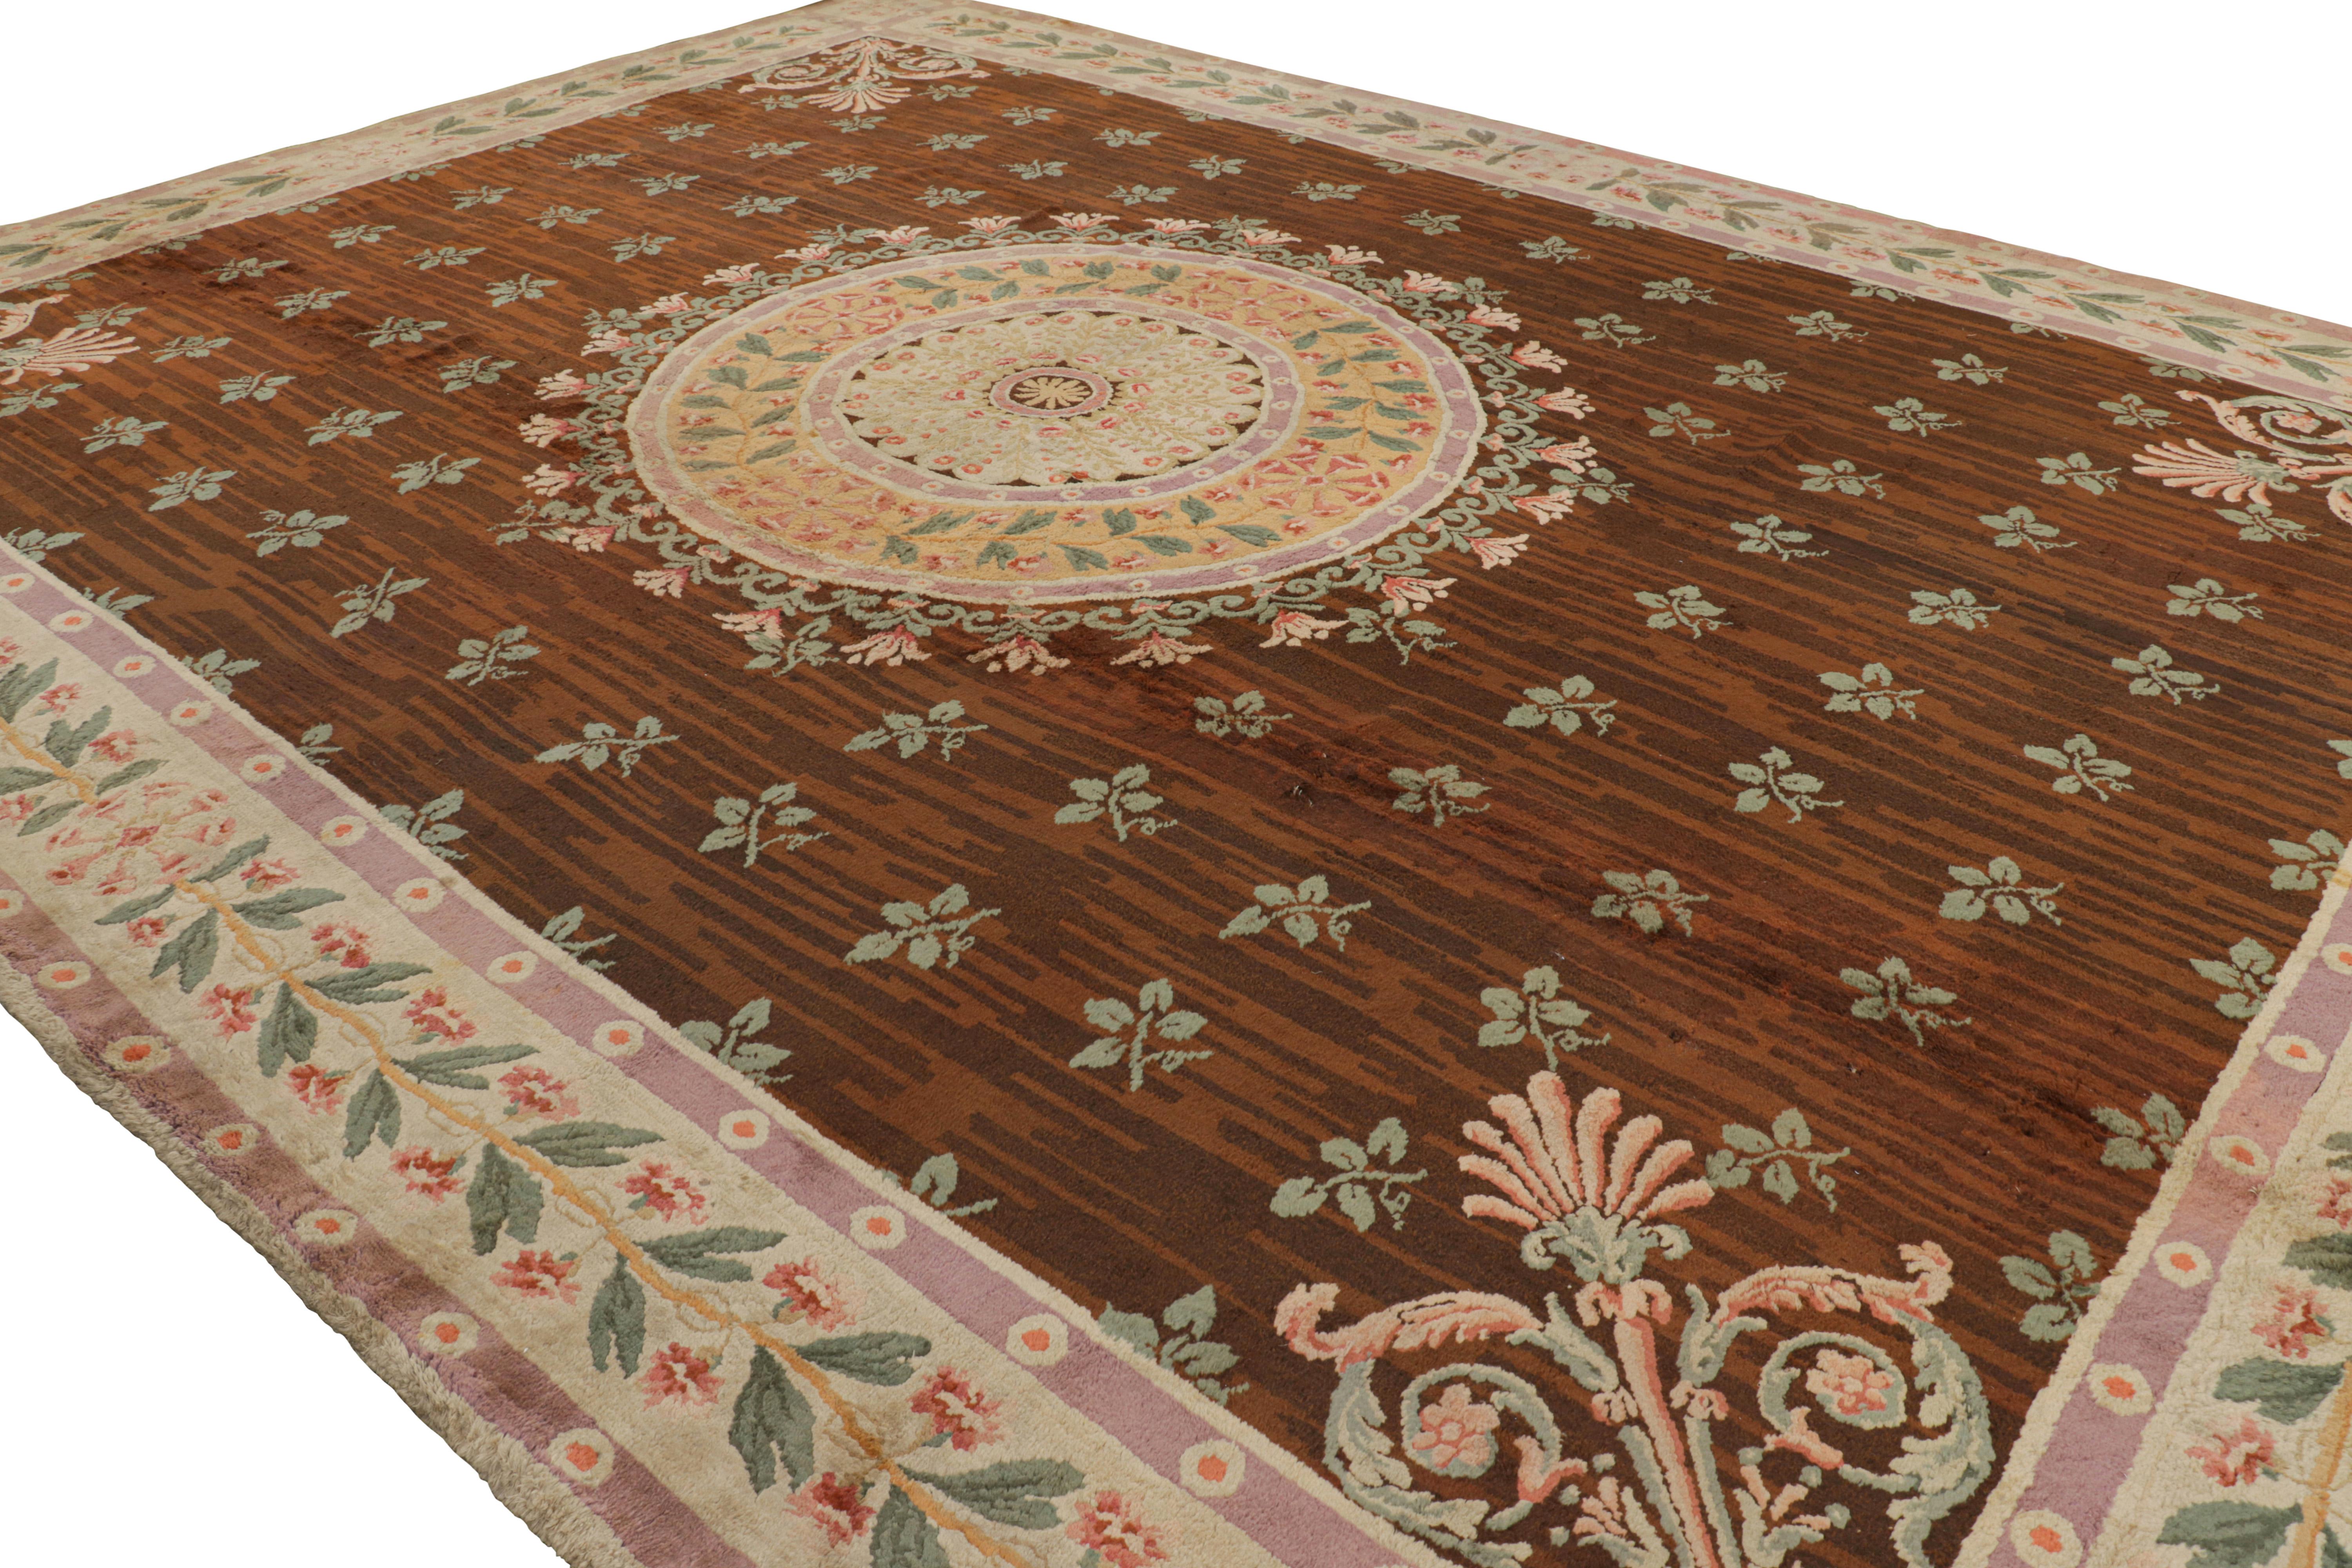 Oversized Antique French Savonnerie Rug with Floral Medallion In Good Condition For Sale In Long Island City, NY